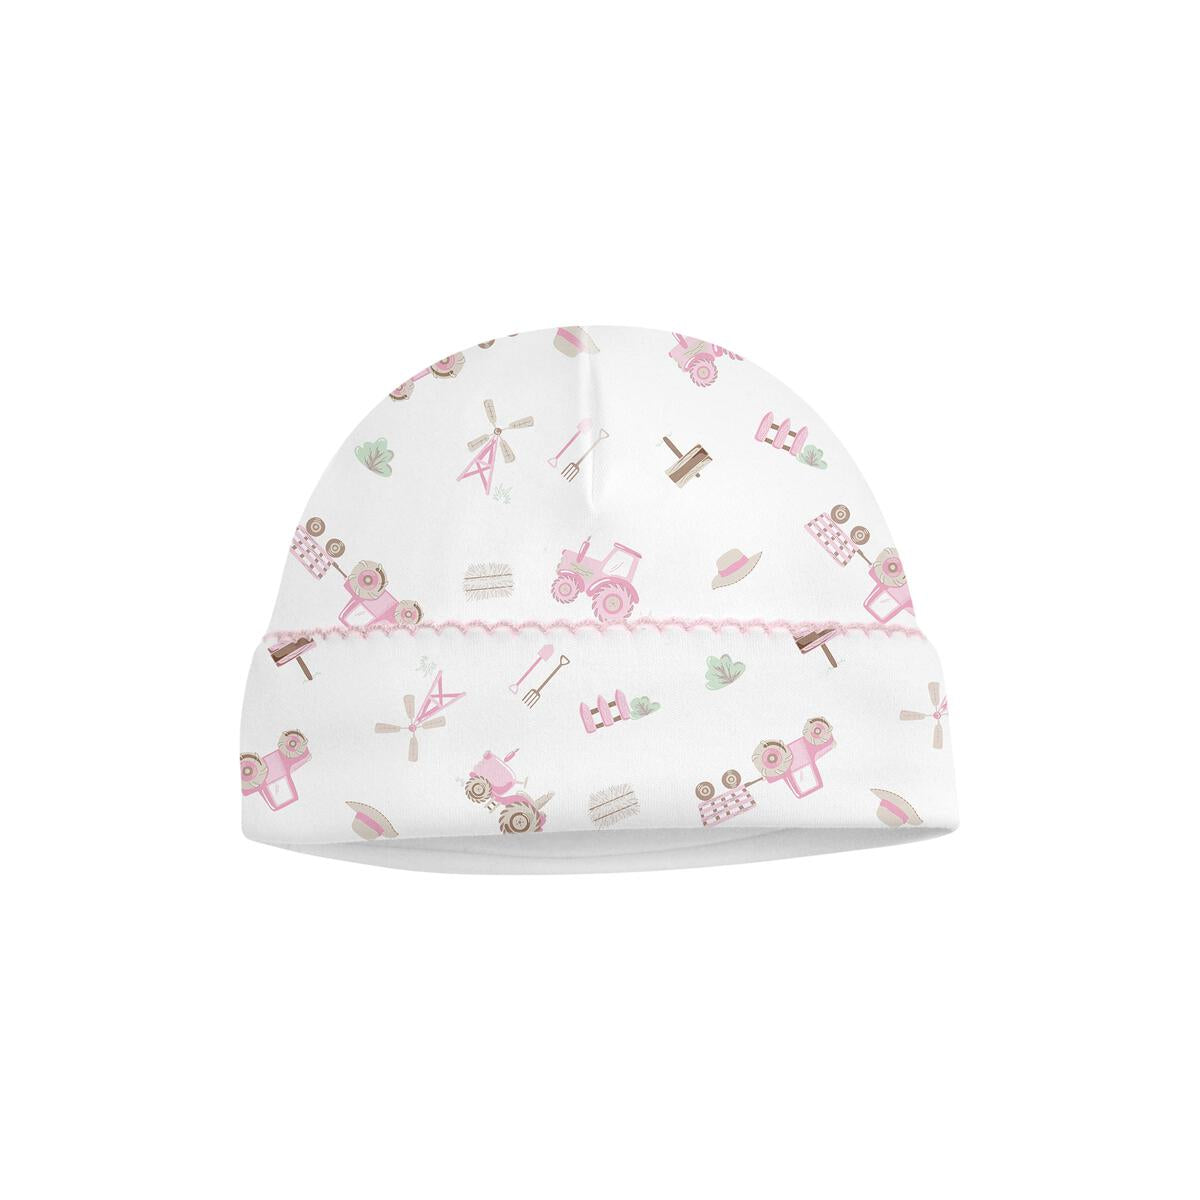 Lyda Baby In the Farm Print Hat PP07-7117 5007